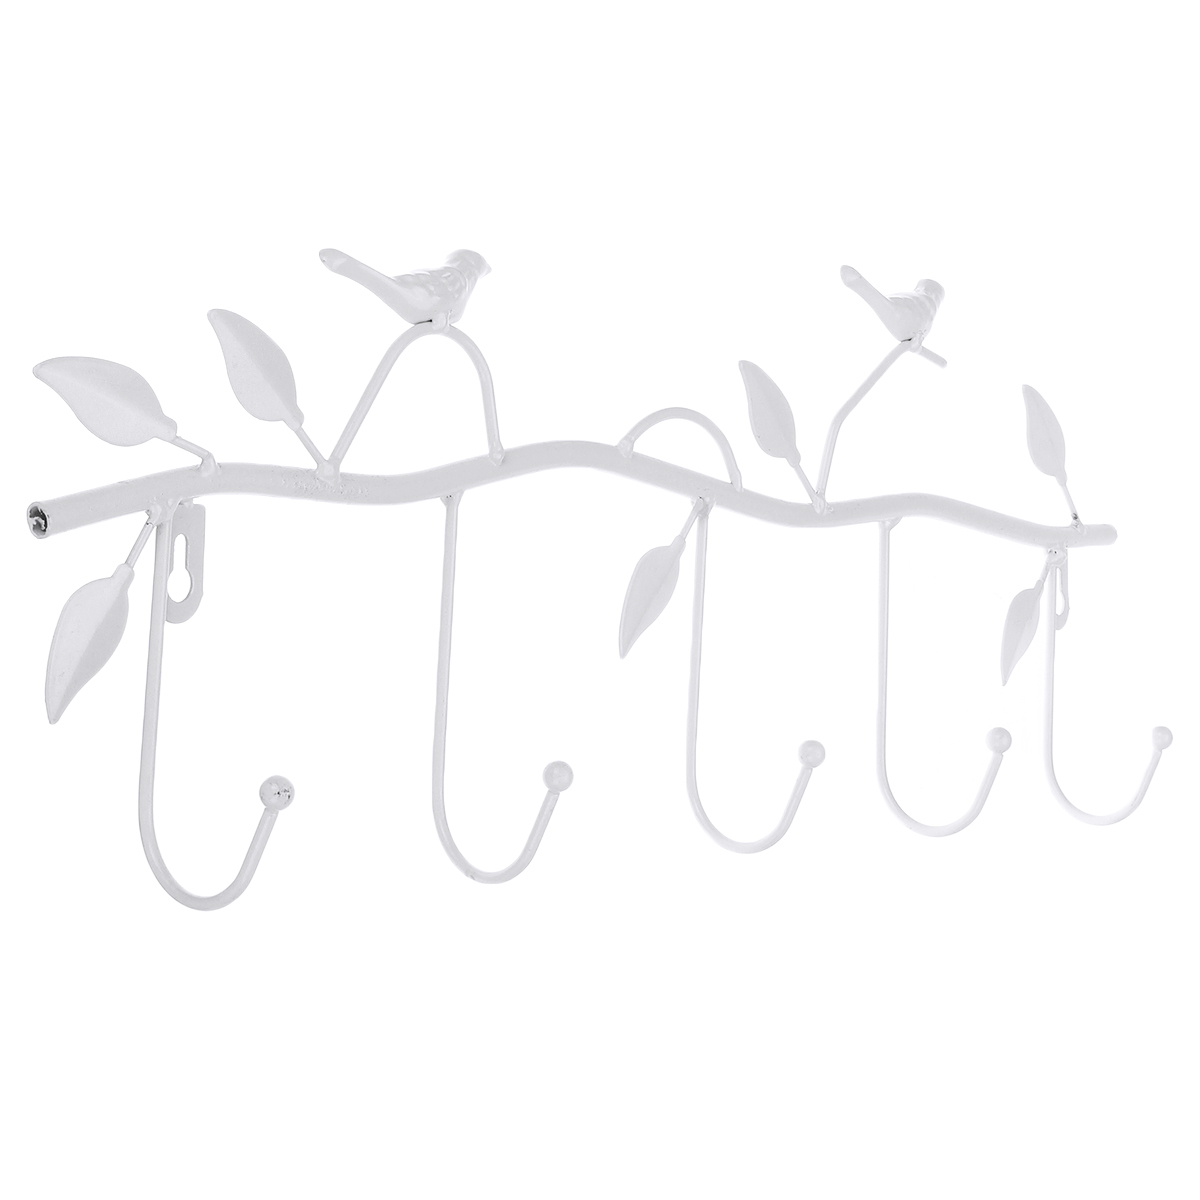 

KSOL Iron Birds Leaves Hat/Towel/Coat Wall Decor Clothes Hangers Racks With 5 Hooks White Home Hooks